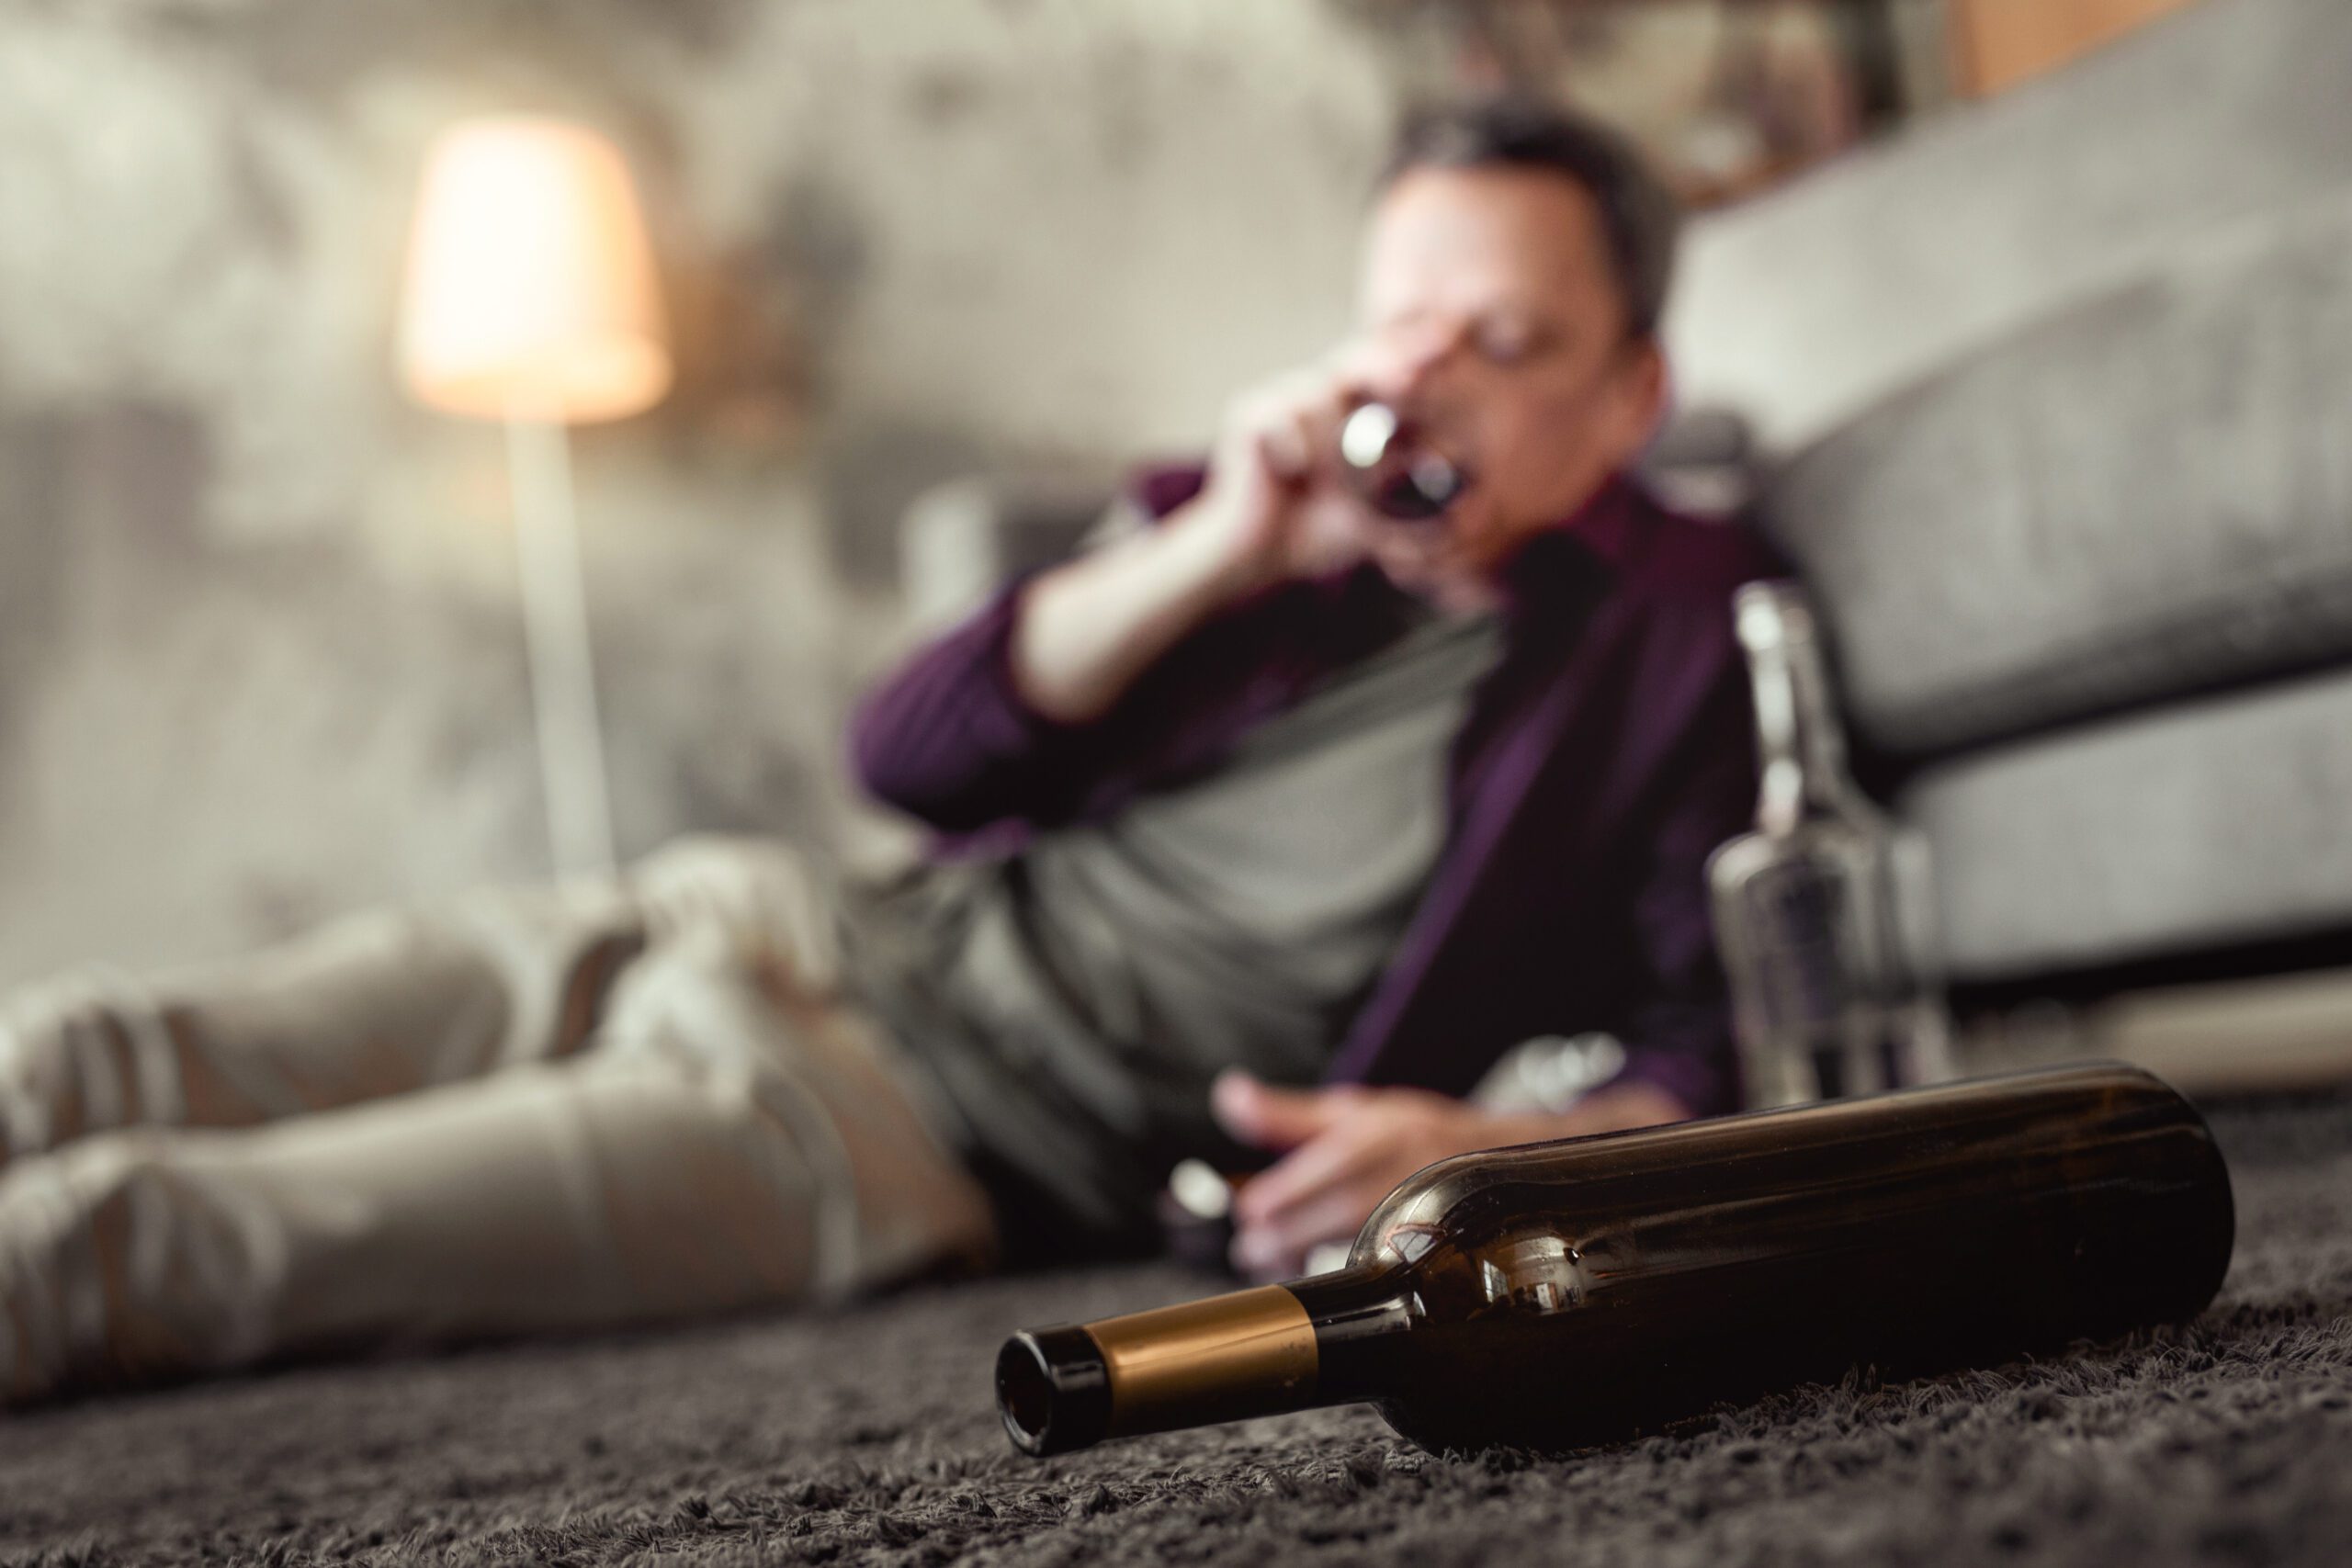 Is Binge Drinking a Sign of Alcohol Addiction?, Signs of Binge Drinking, Dangers of Binge Drinking,